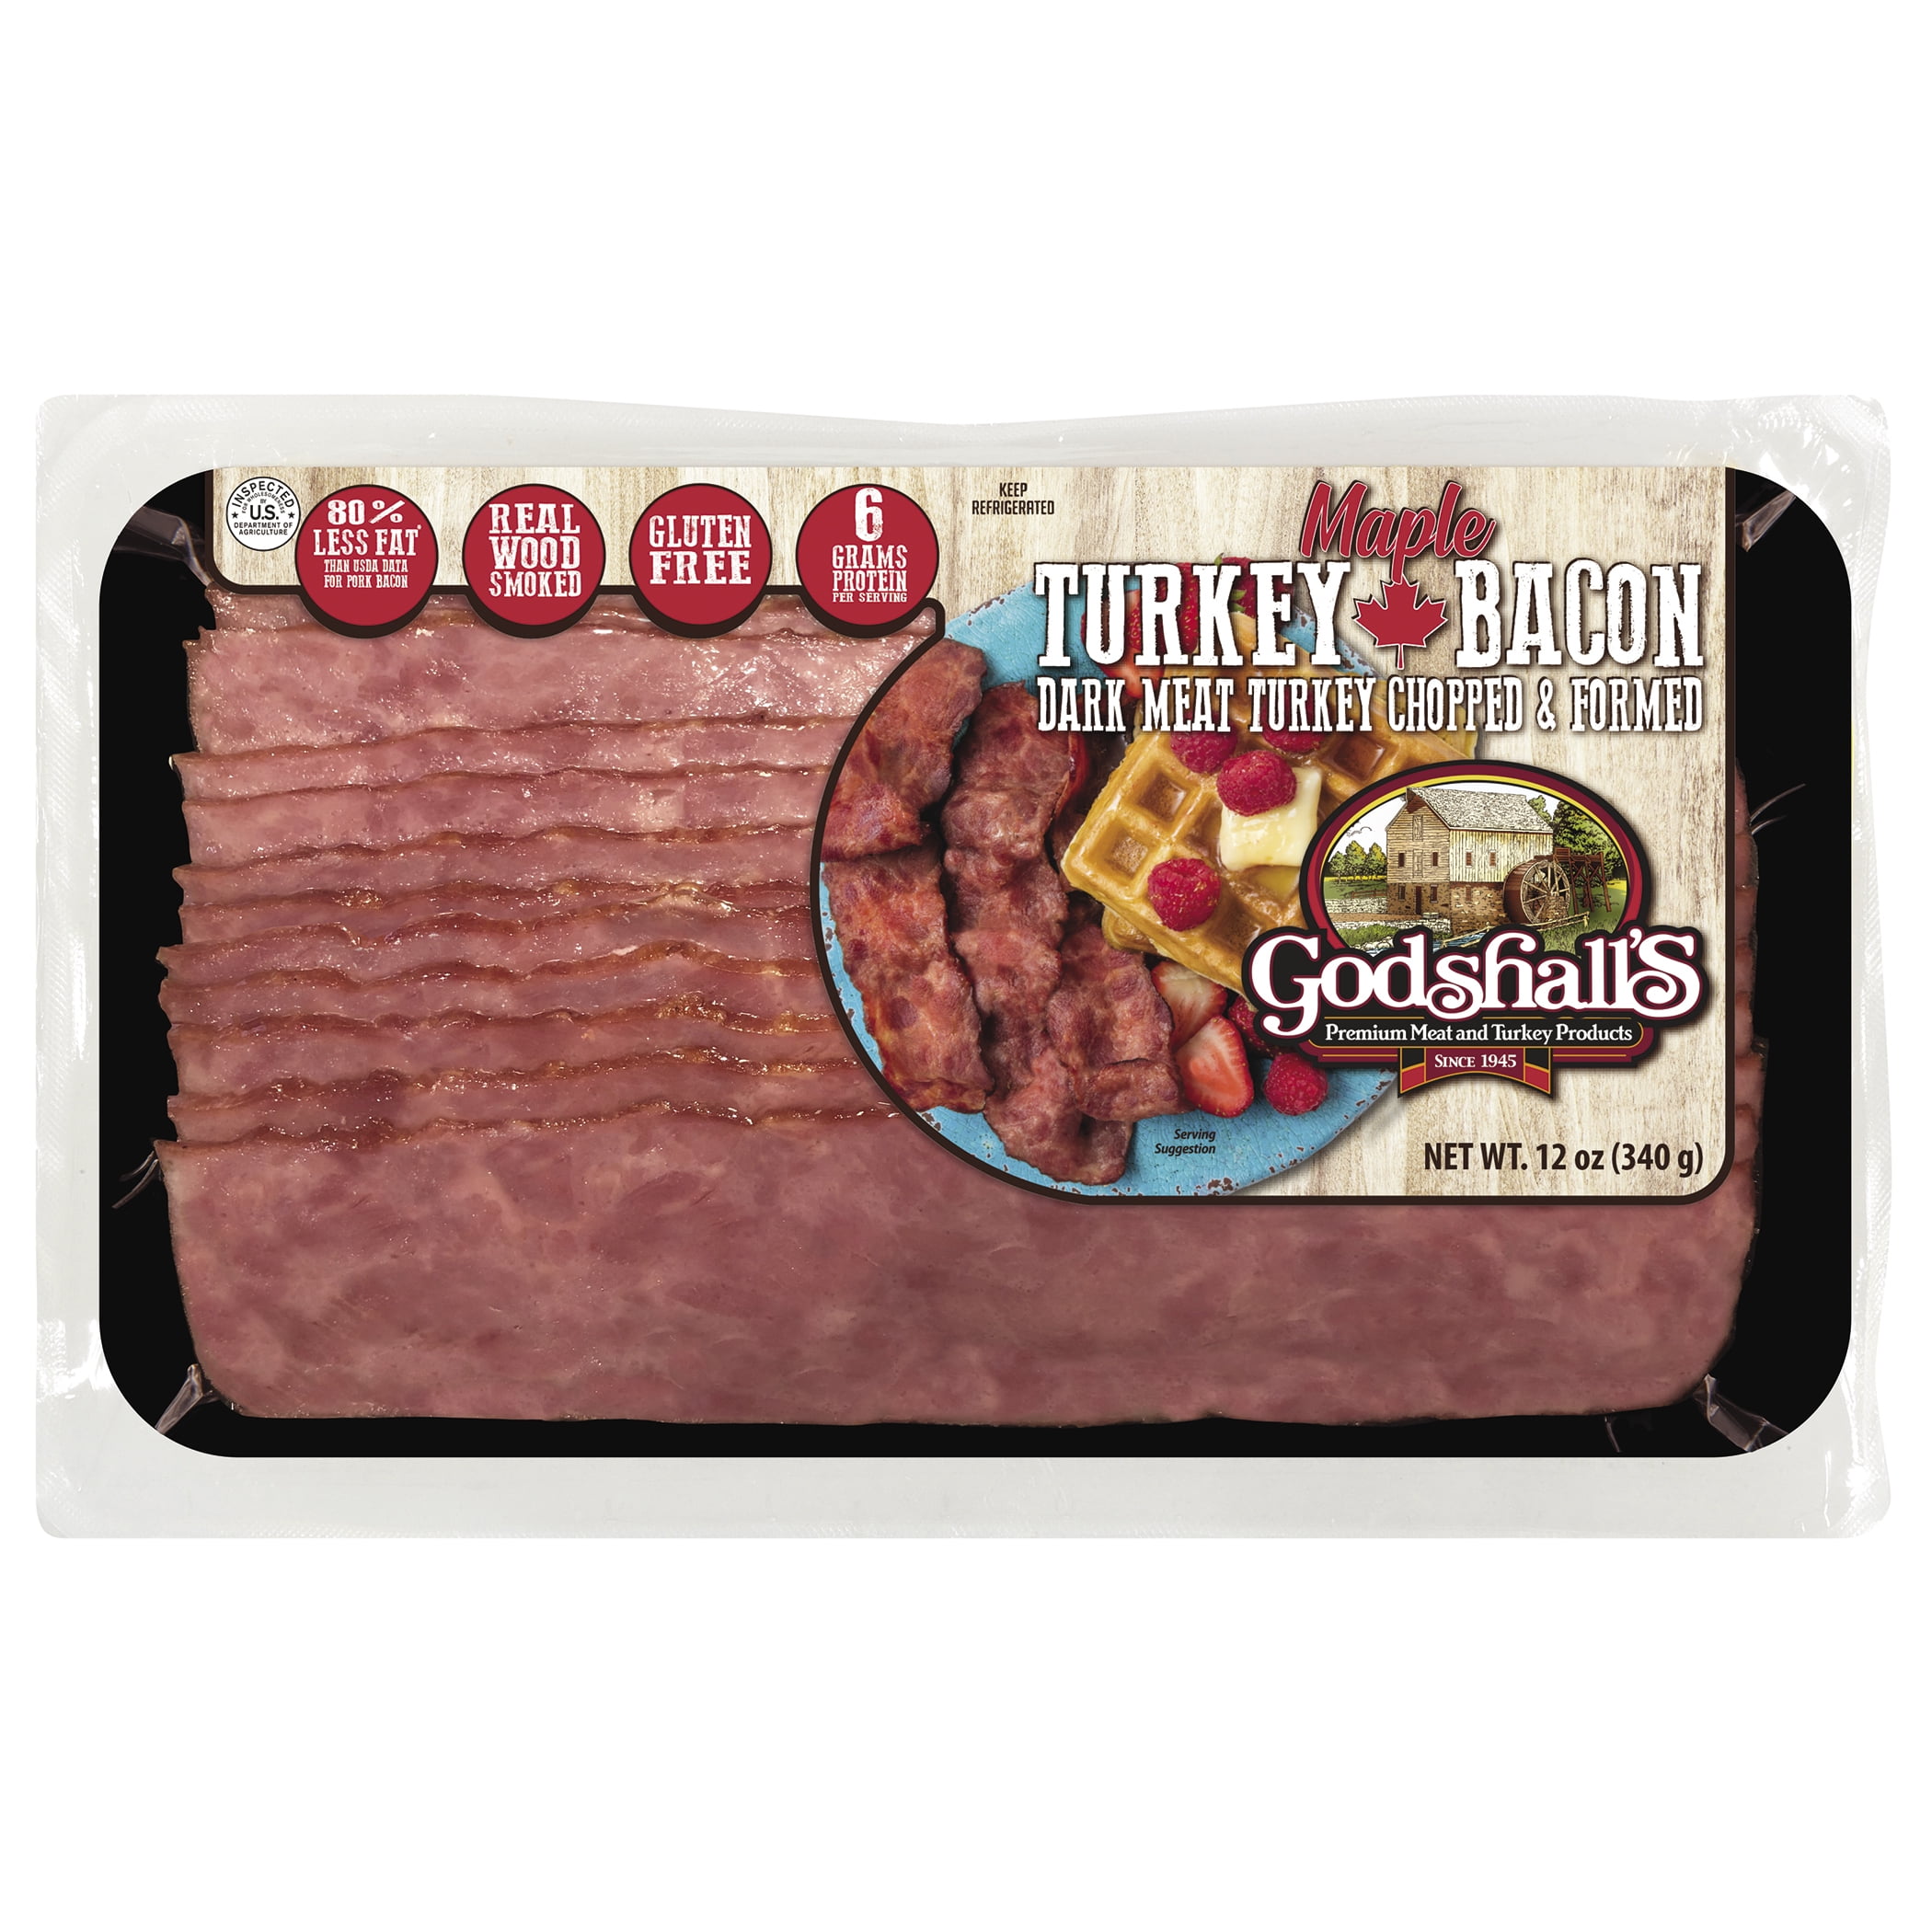 Fully Cooked Uncured Turkey Bacon - Godshall's - Real Wood Smoked Meats  Since 1945